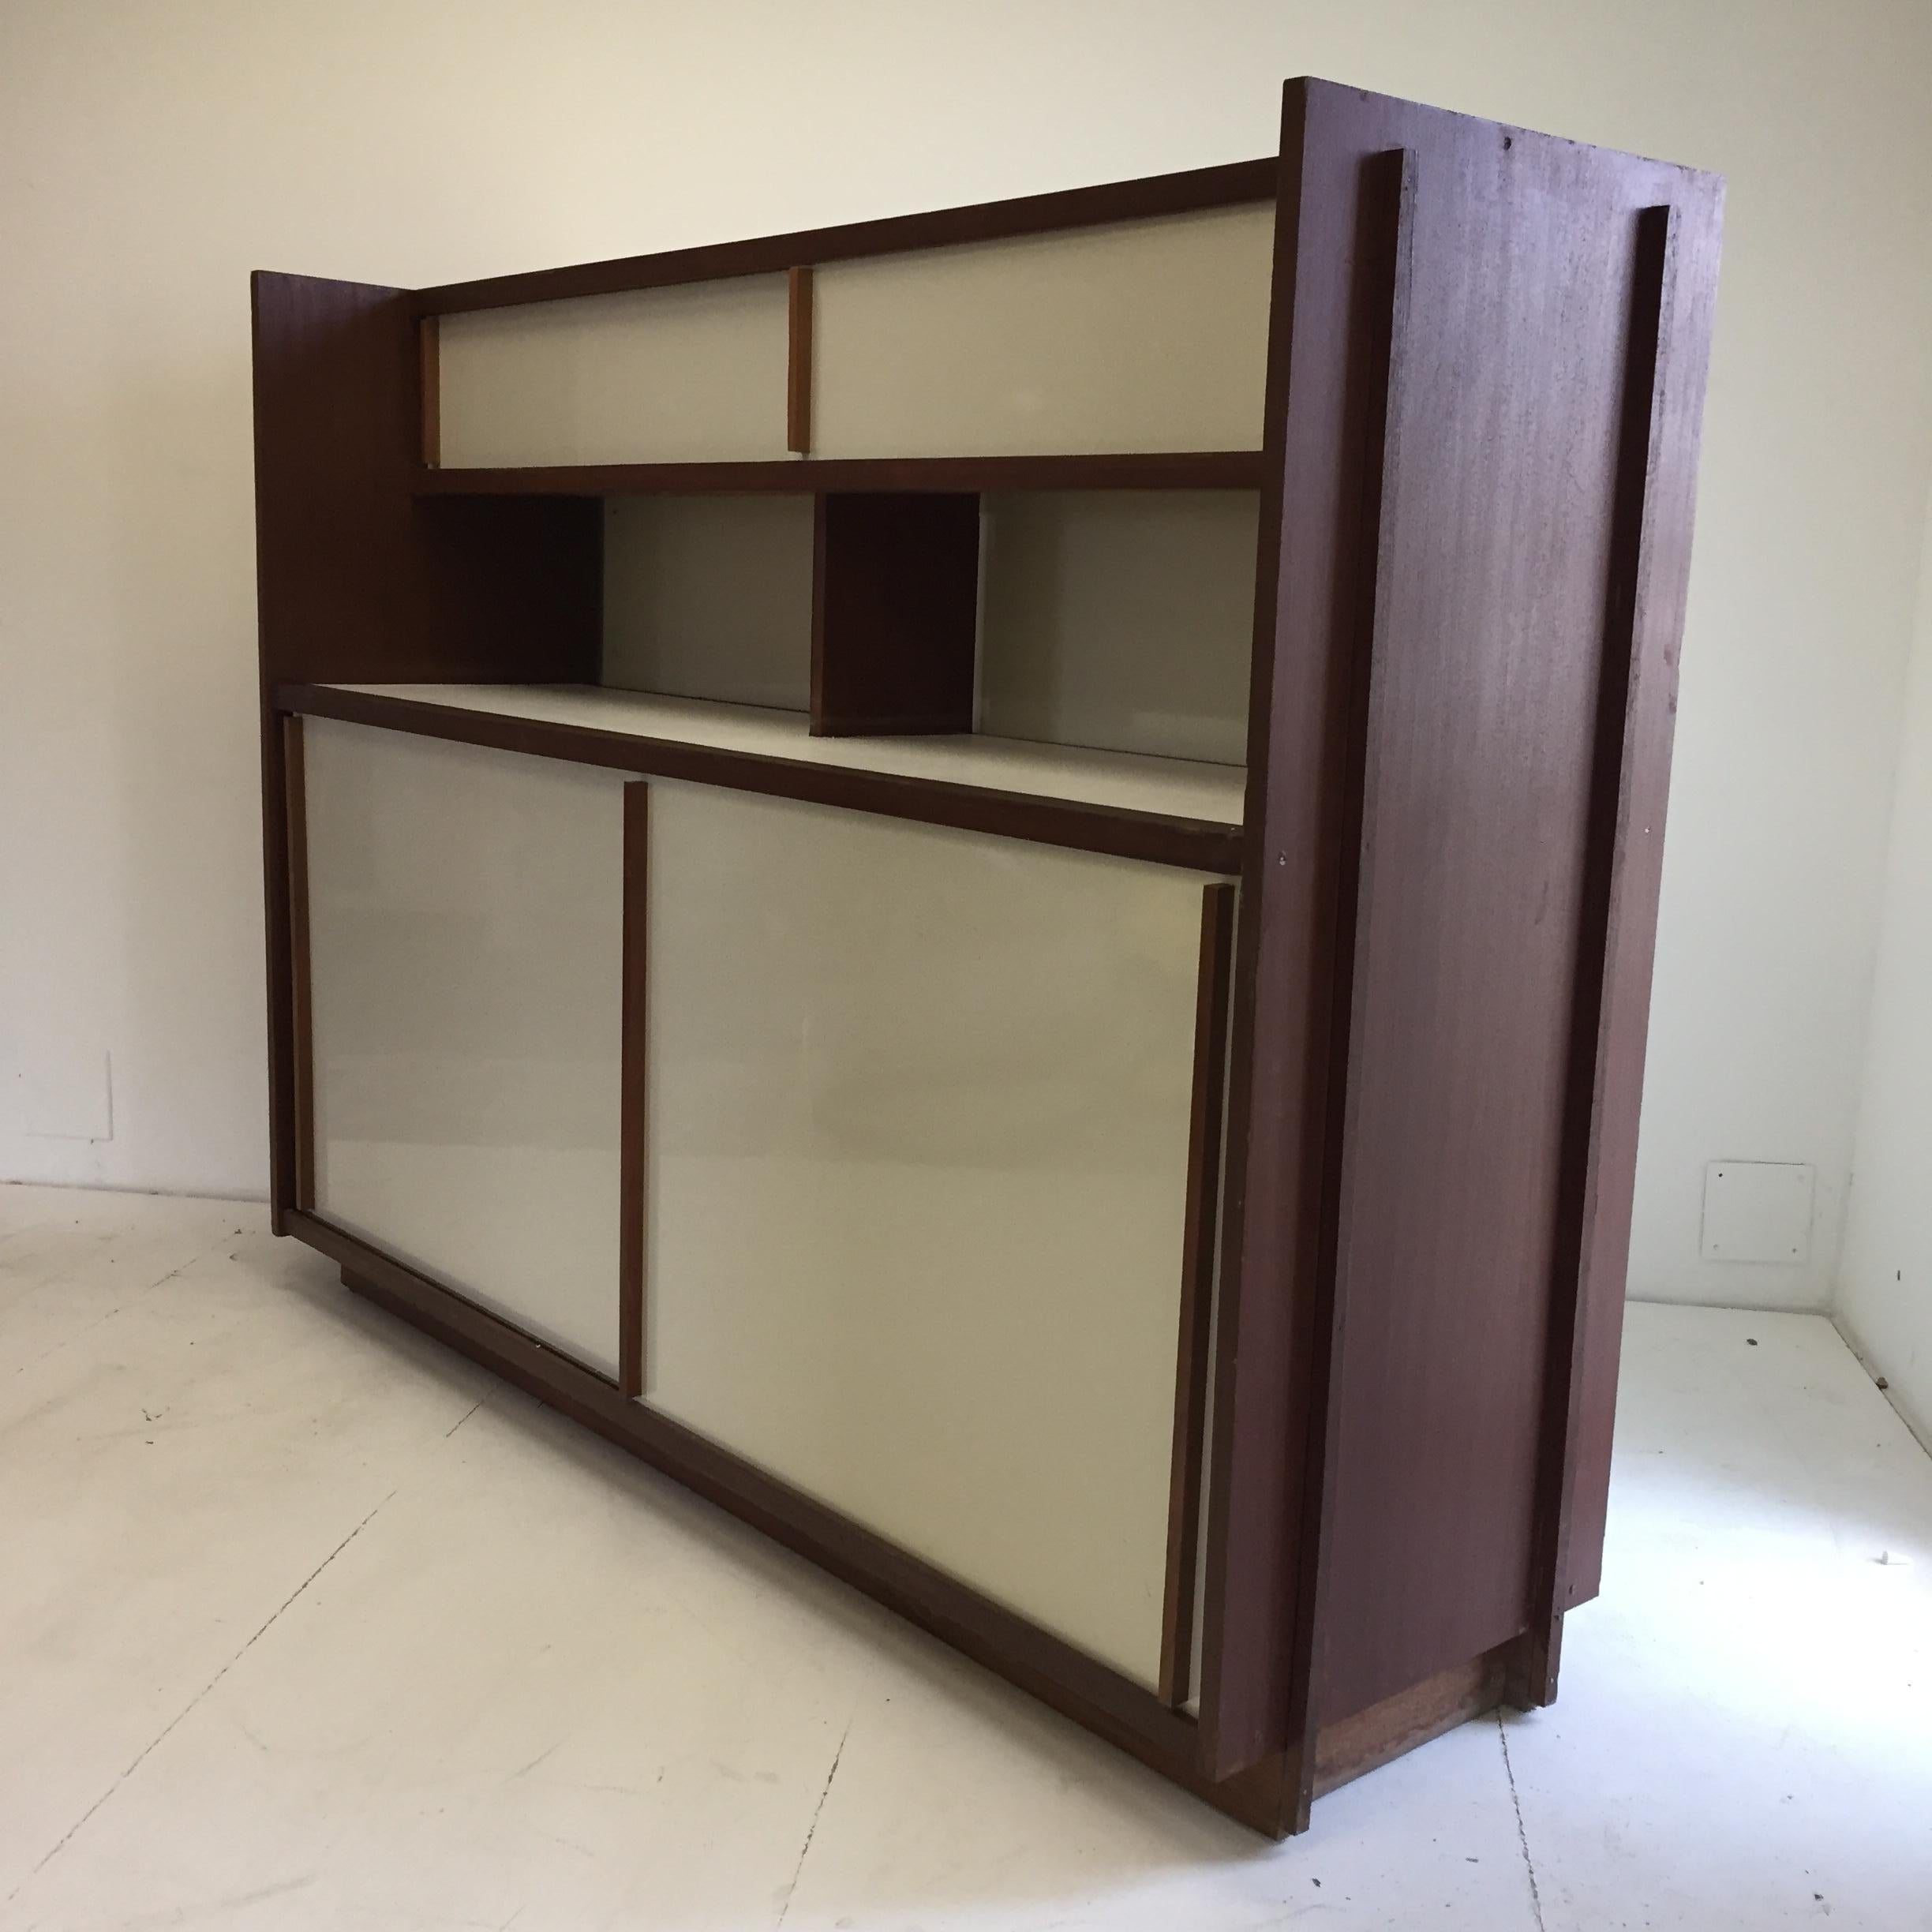 His kitchen cabinet comes from the Unité d’Habitation Cité Radieuse de Firminy. It features a sipo / mahogany body, an interior made of chipboard, white fronts.